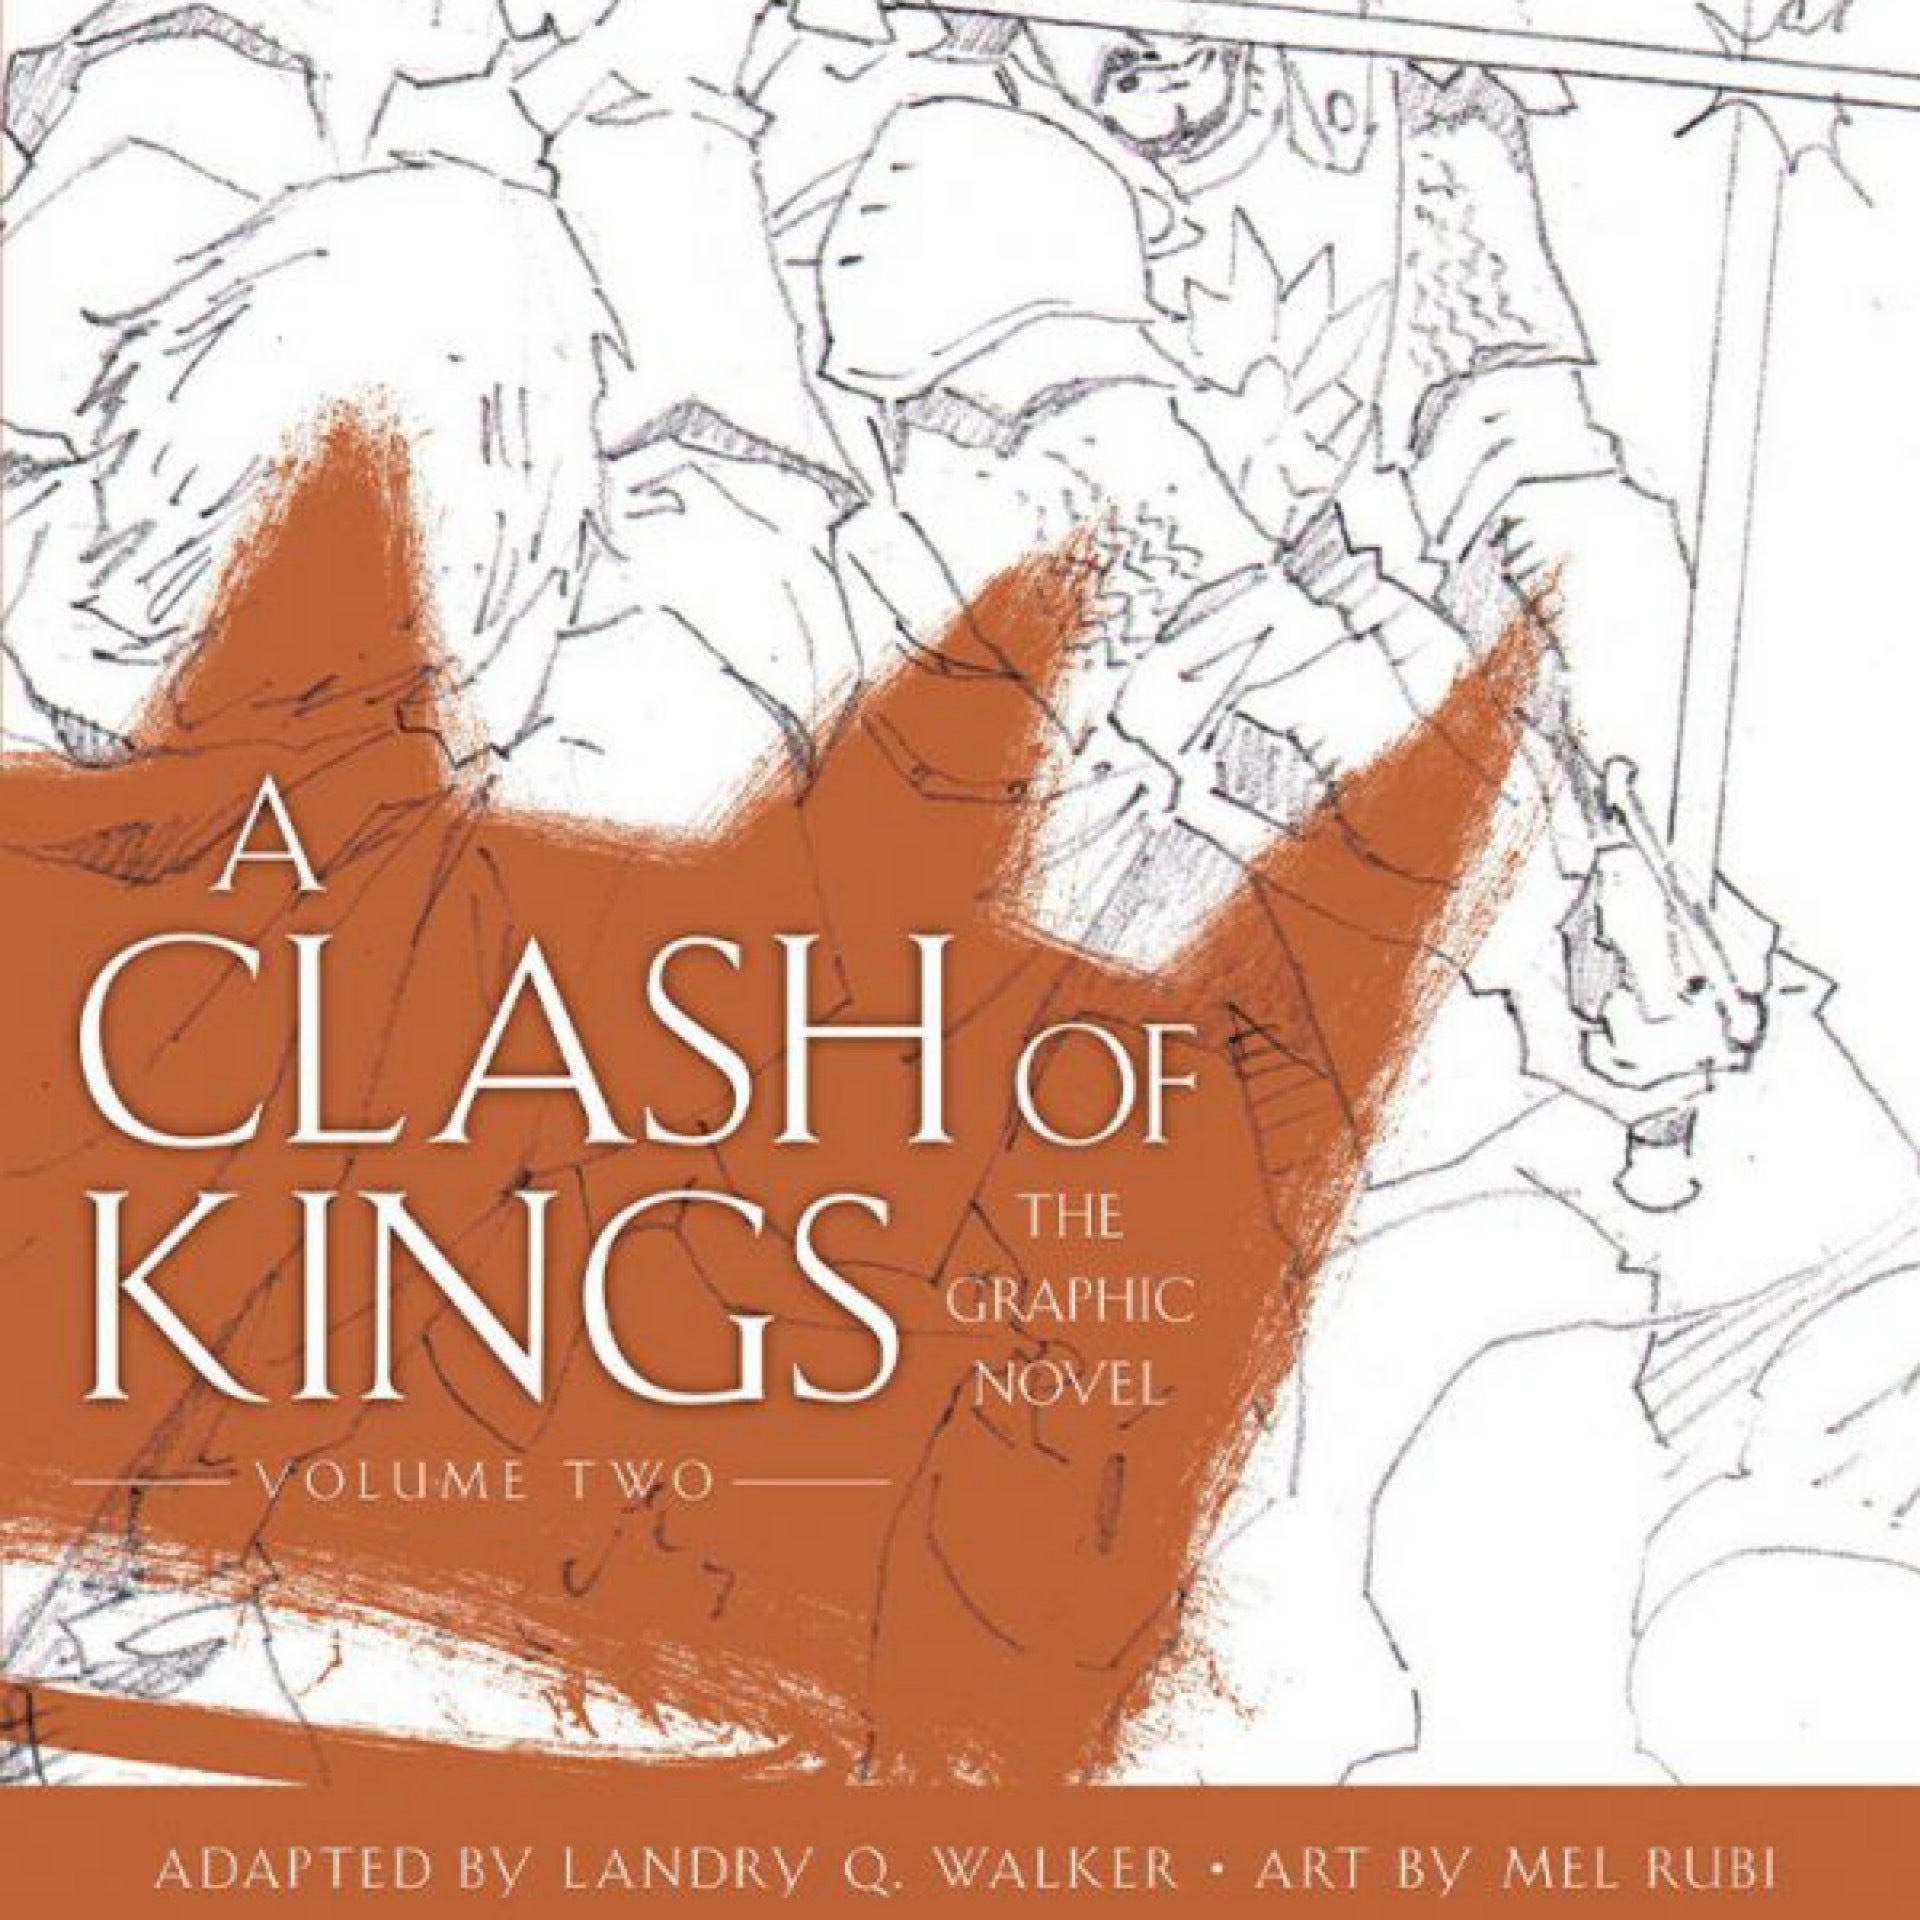 A CLASH OF KINGS SIGNED by George R. R. Martin